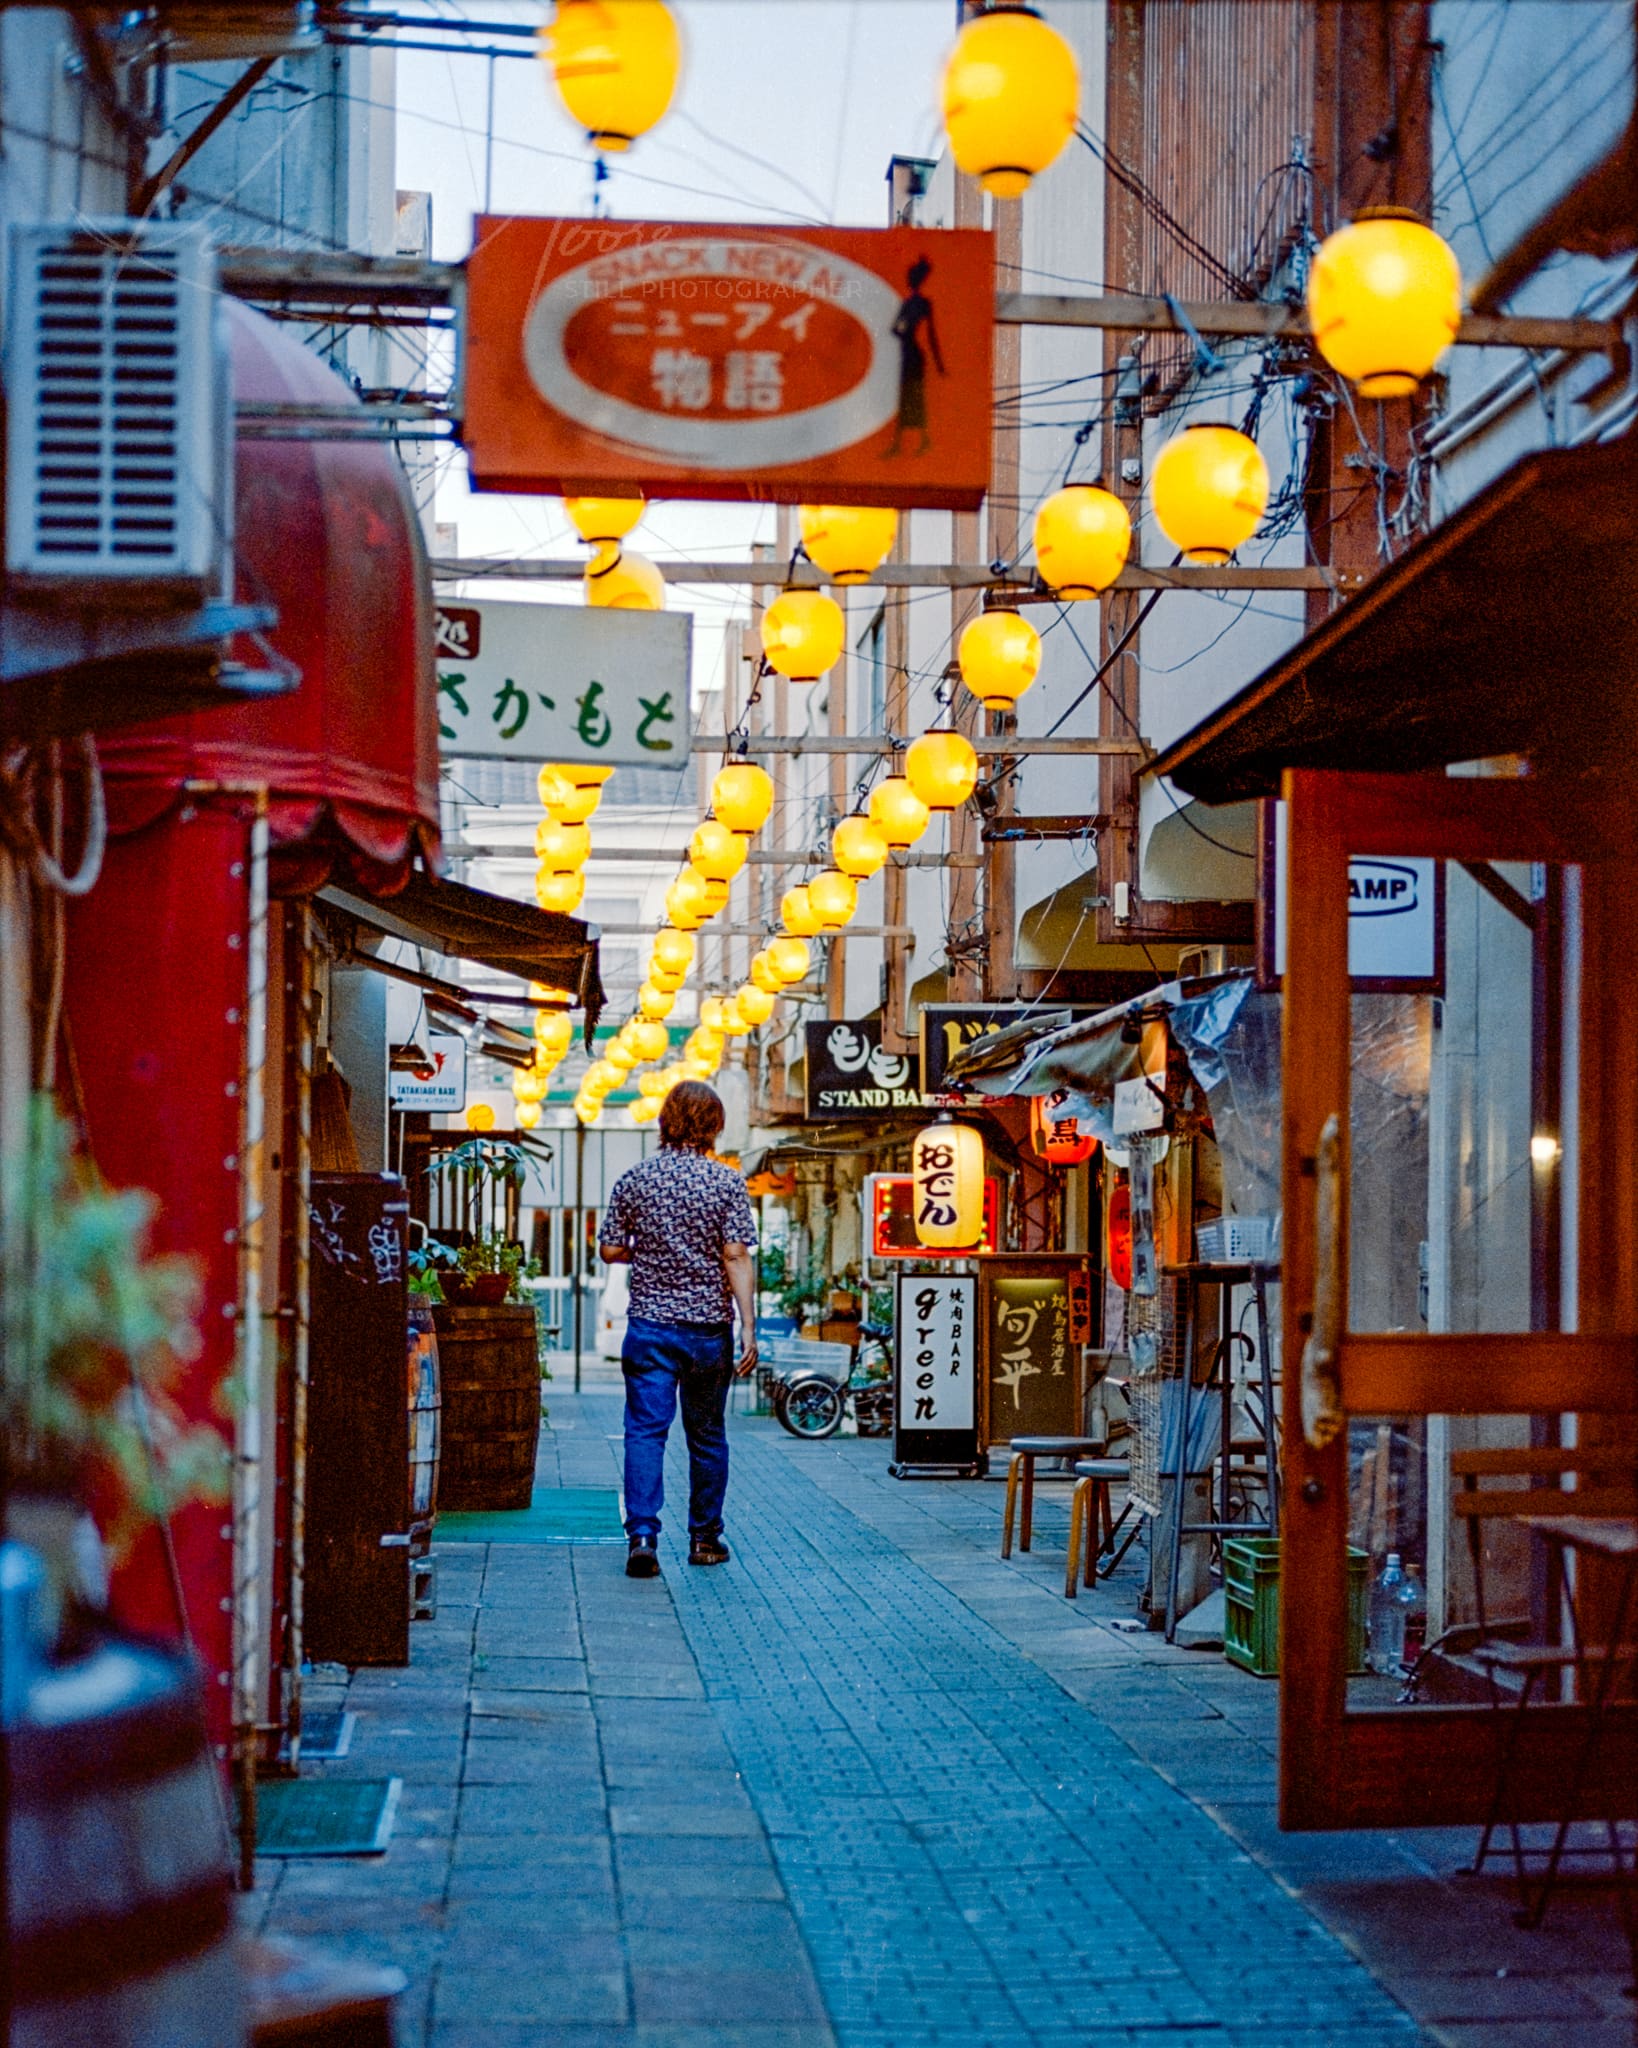 Japanese alleyway at dusk featuring traditional lanterns, eclectic storefronts, and a lone pedestrian.